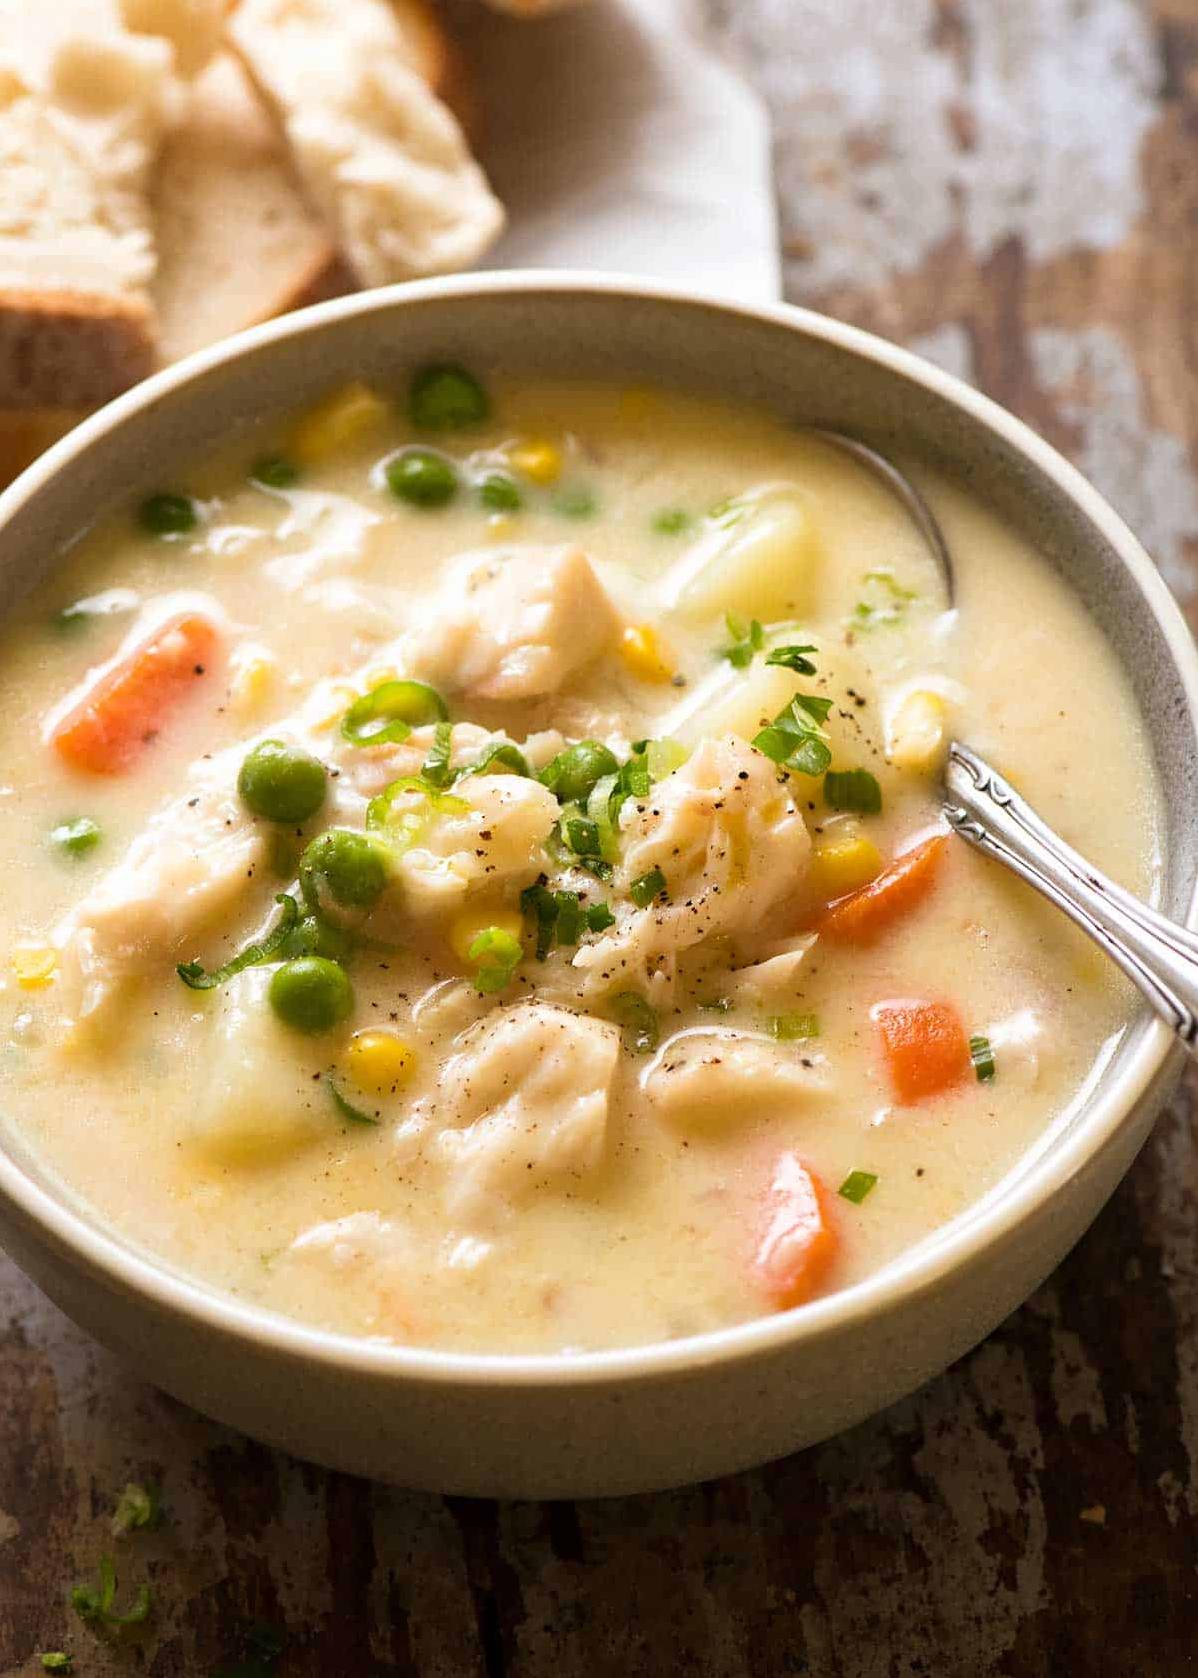  Dive into this creamy and comforting Vegetarian Fish Chowder!